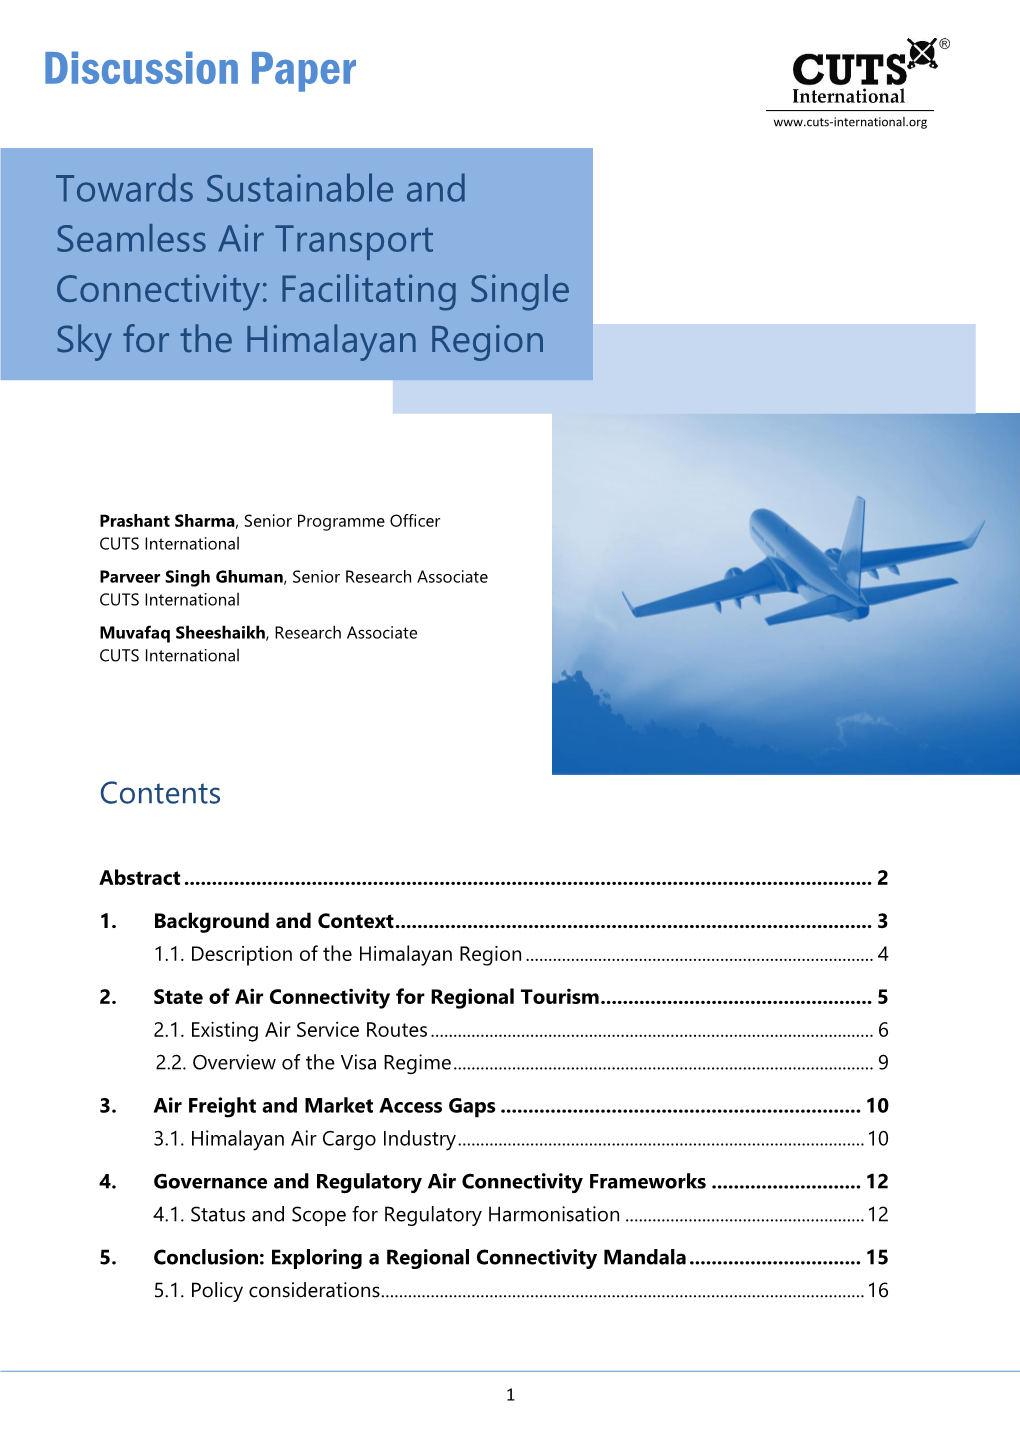 Towards Sustainable and Seamless Air Transport Connectivity